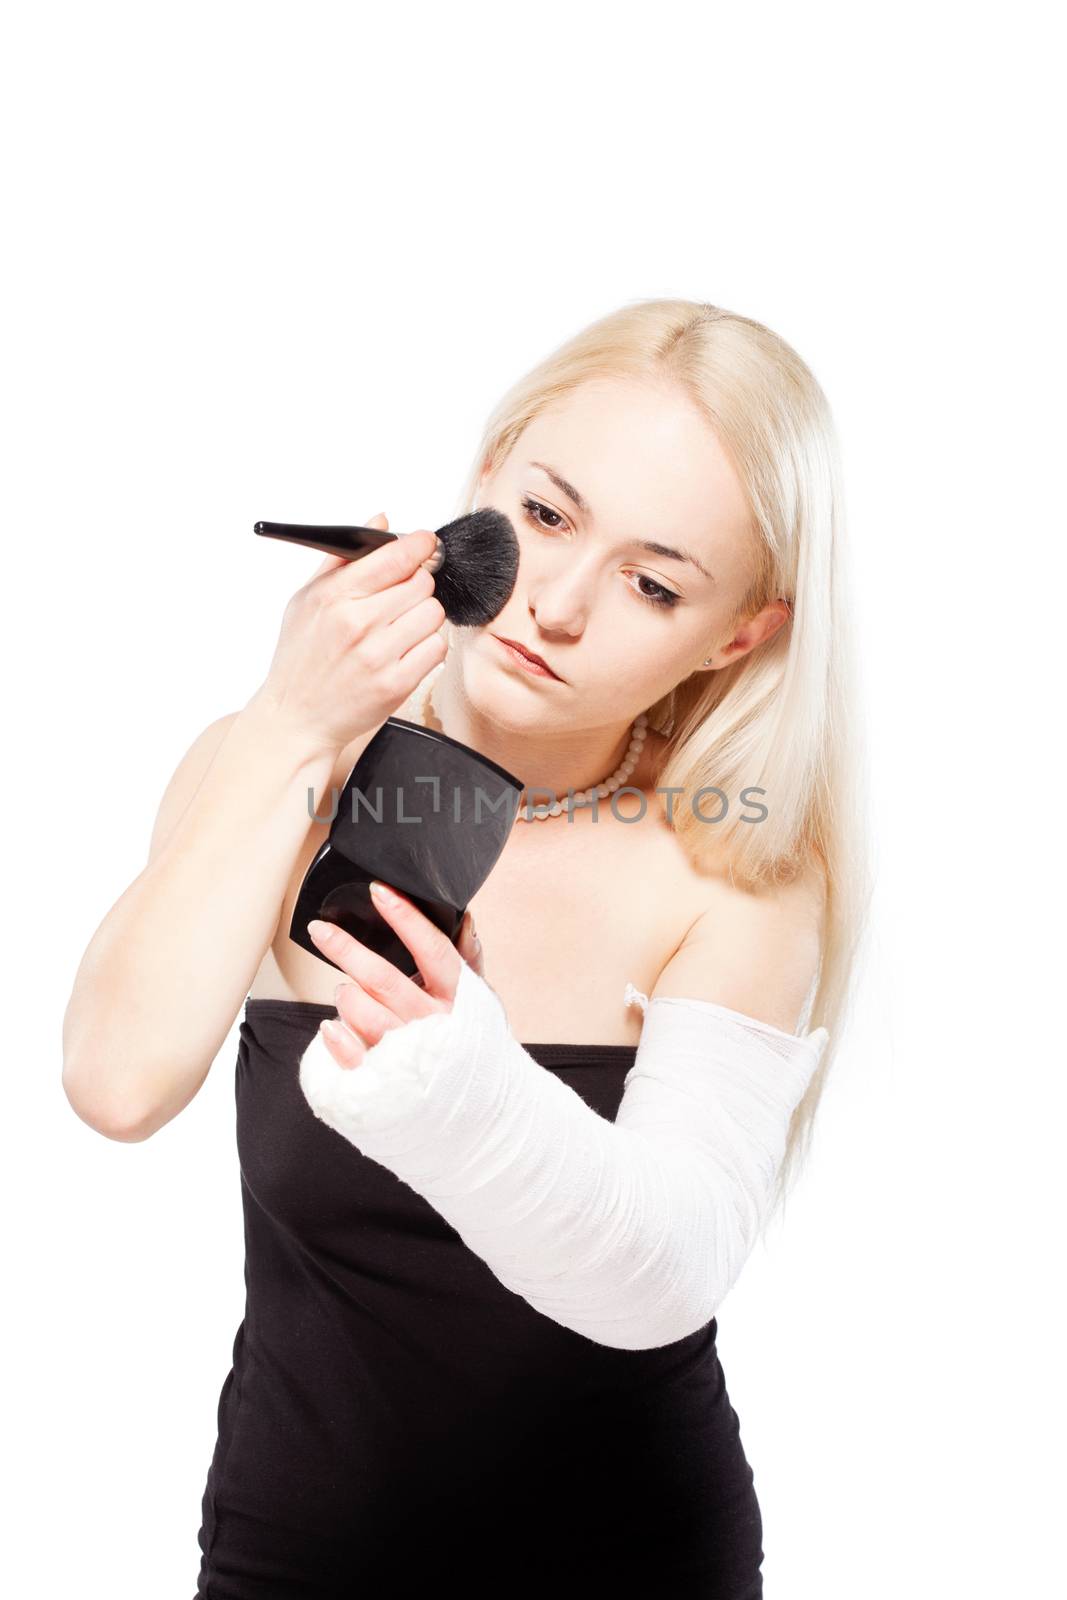 Blond girl with a broken arm in plaster having trouble putting a lipstick